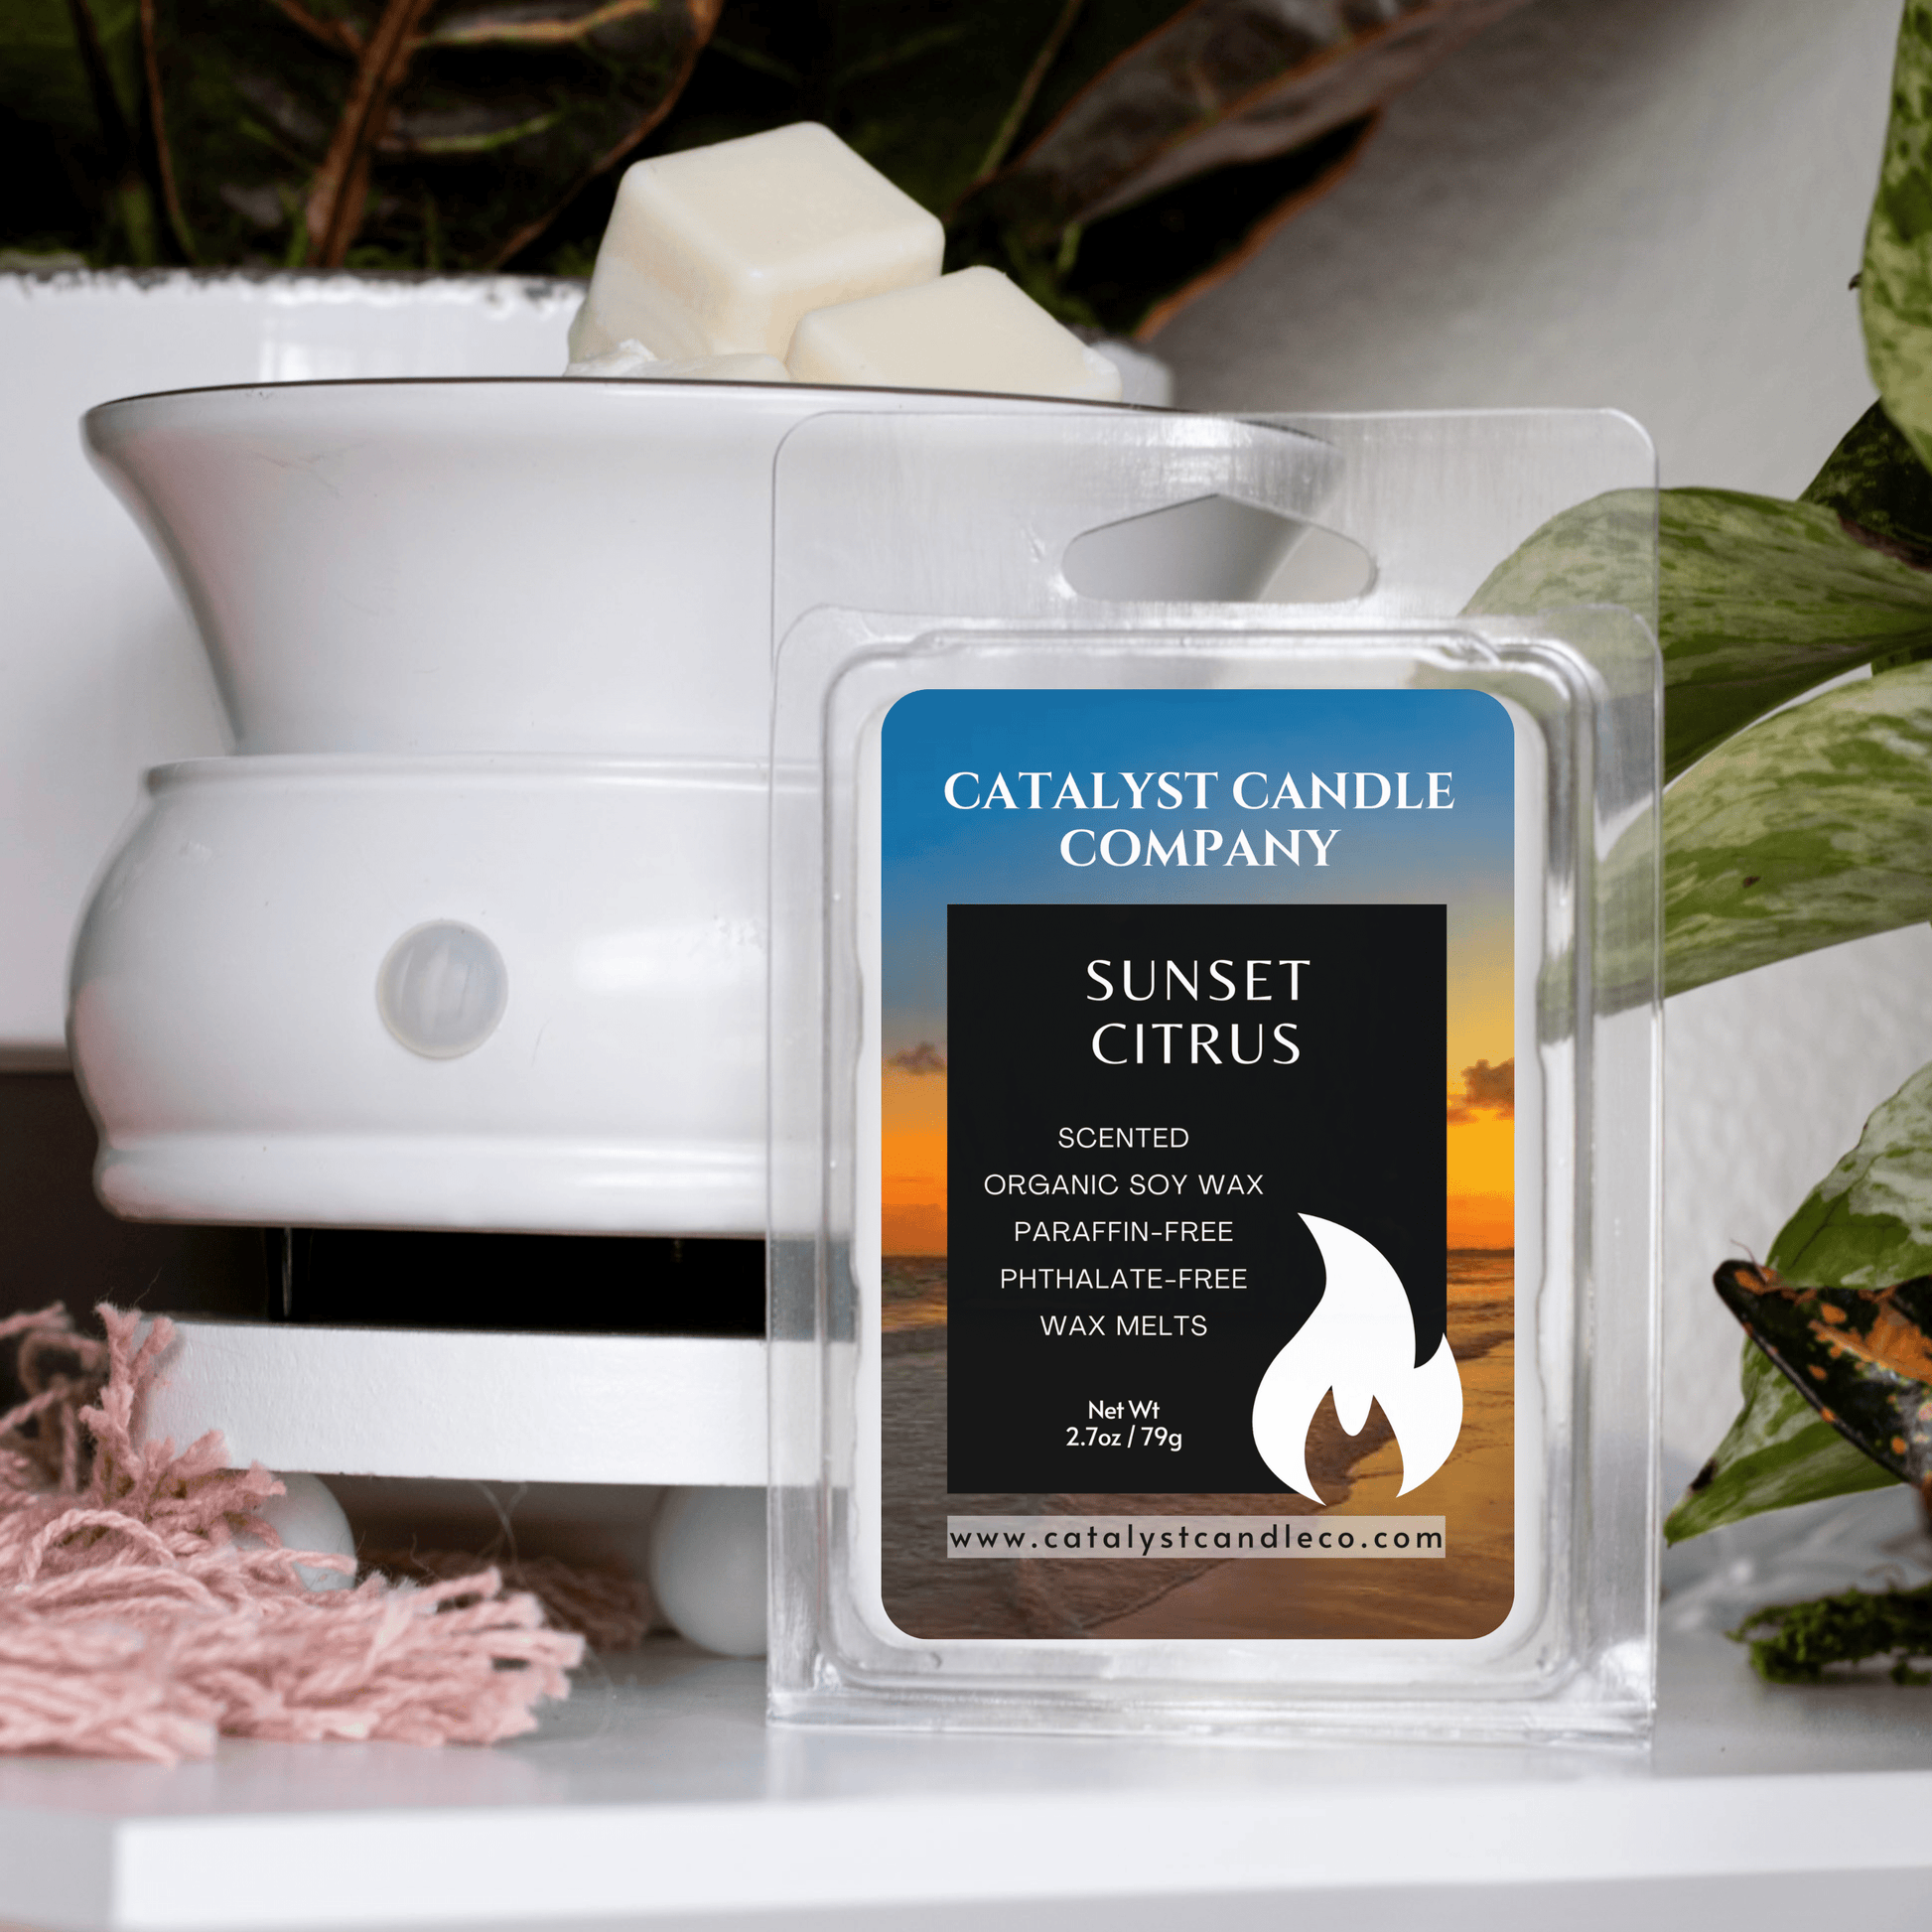 Fresh and clean aroma. Citrus aroma. Sundet Citrus scented soy wax melts. Catalyst Candle Company, LLC